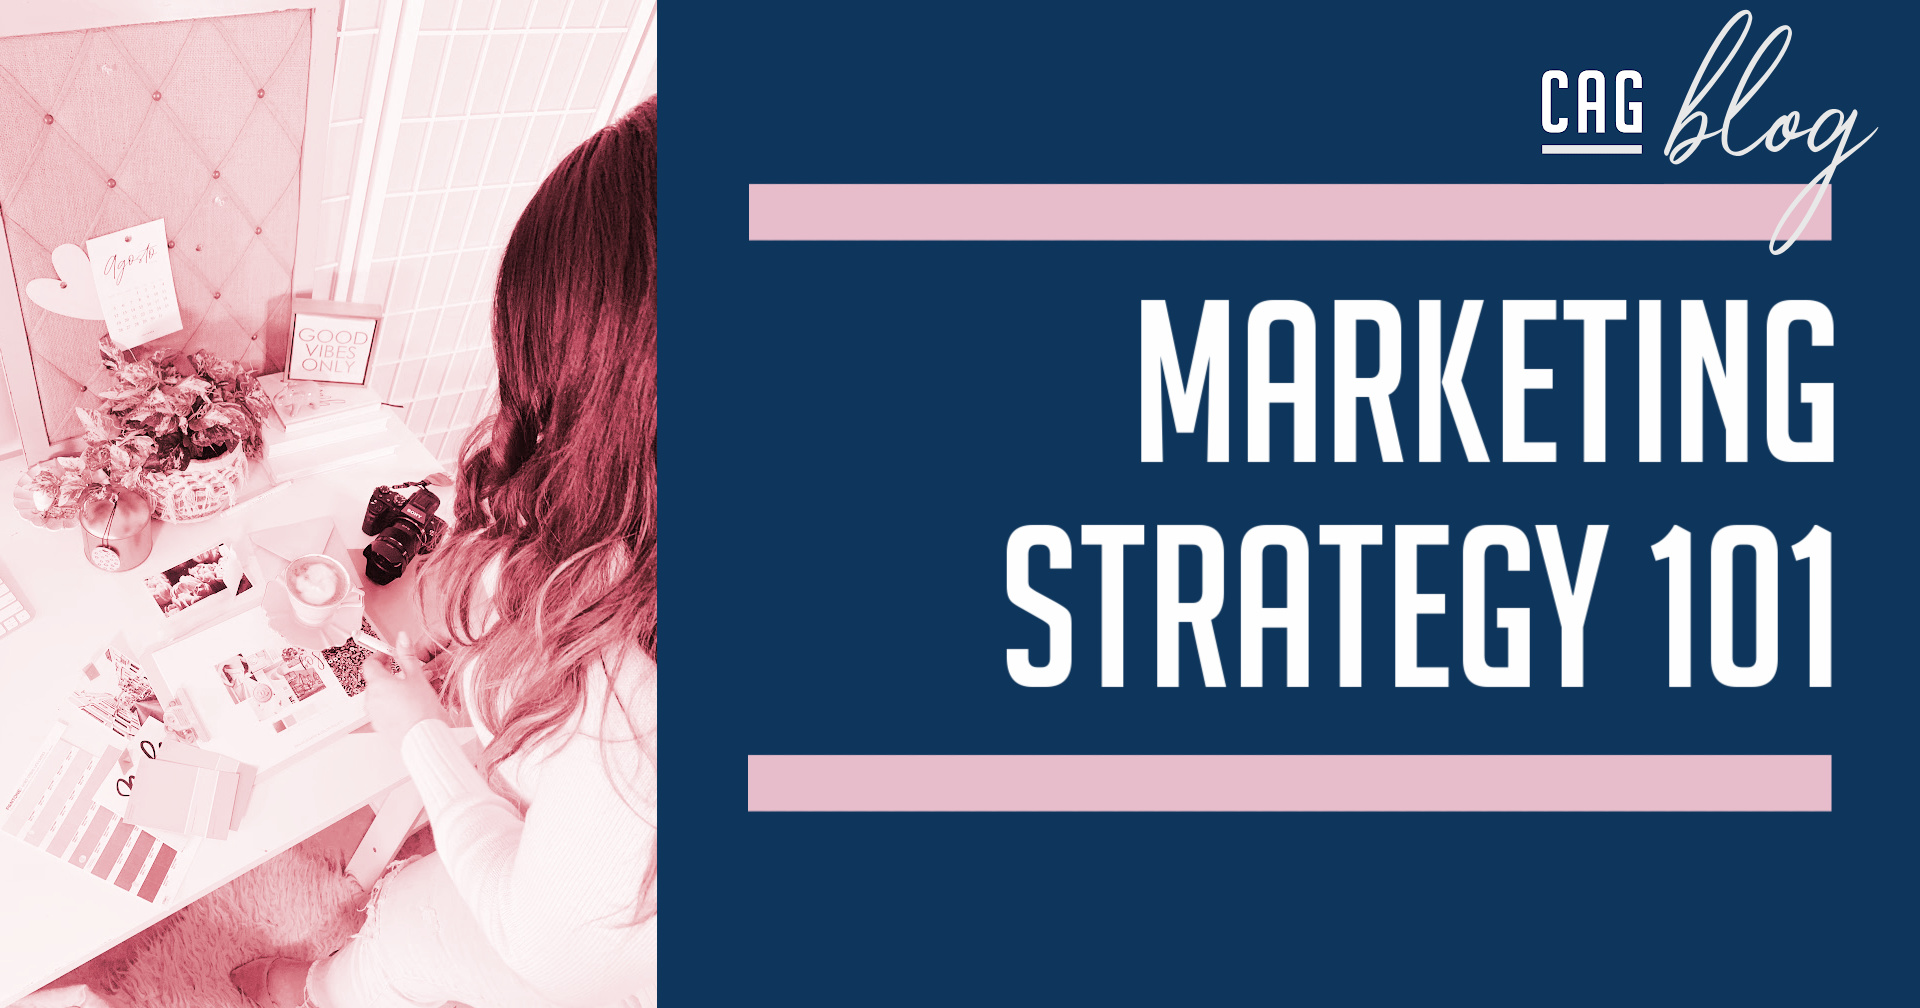 Is a marketing strategy important for your business